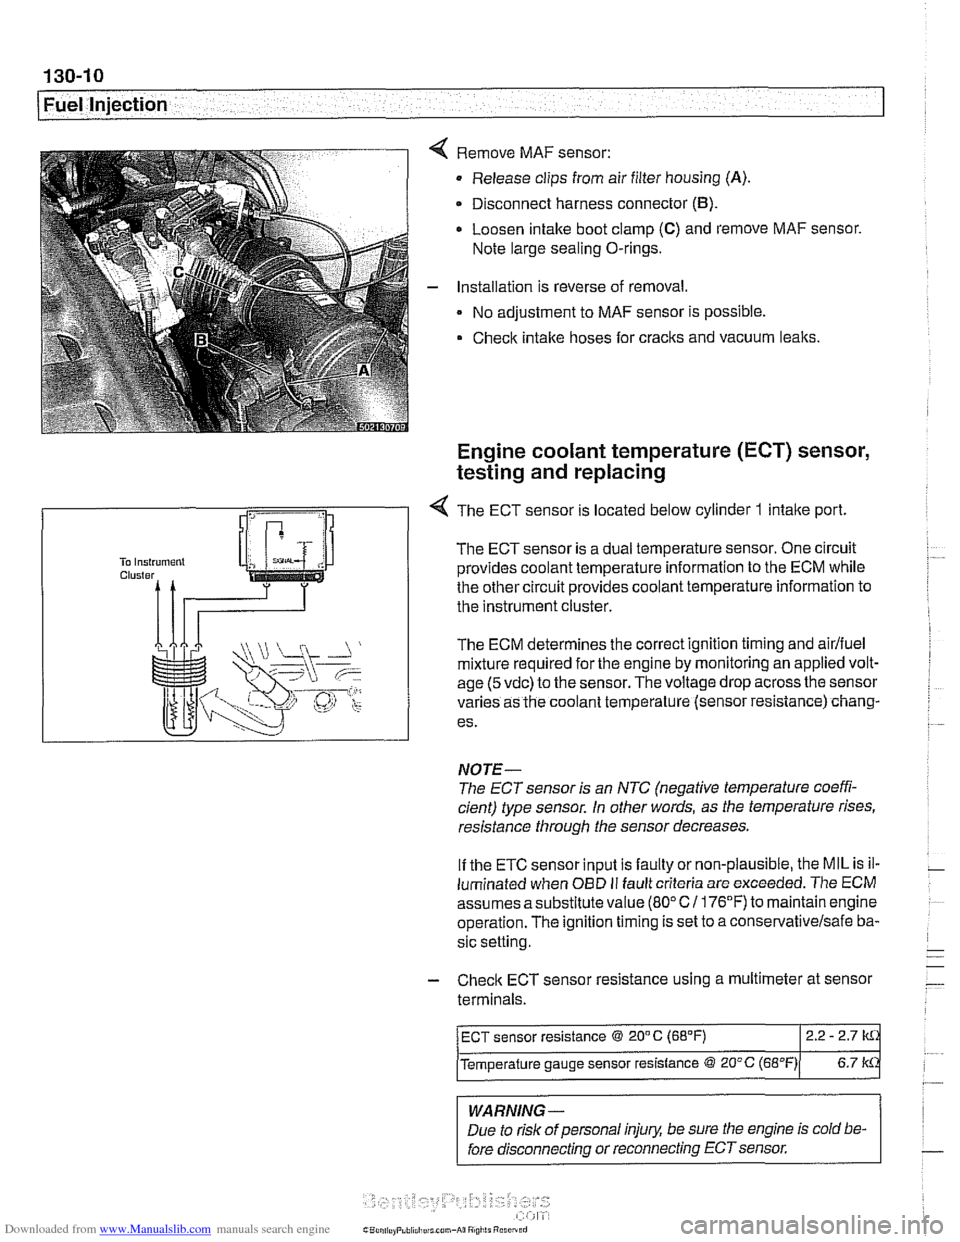 BMW 530i 2000 E39 Service Manual Downloaded from www.Manualslib.com manuals search engine 
130-1 0 
Fuel Injection 
Remove  MAF sensor: 
Release clips  from air filter housing 
(A). 
Disconnect harness connector (B). 
Loosen intake b